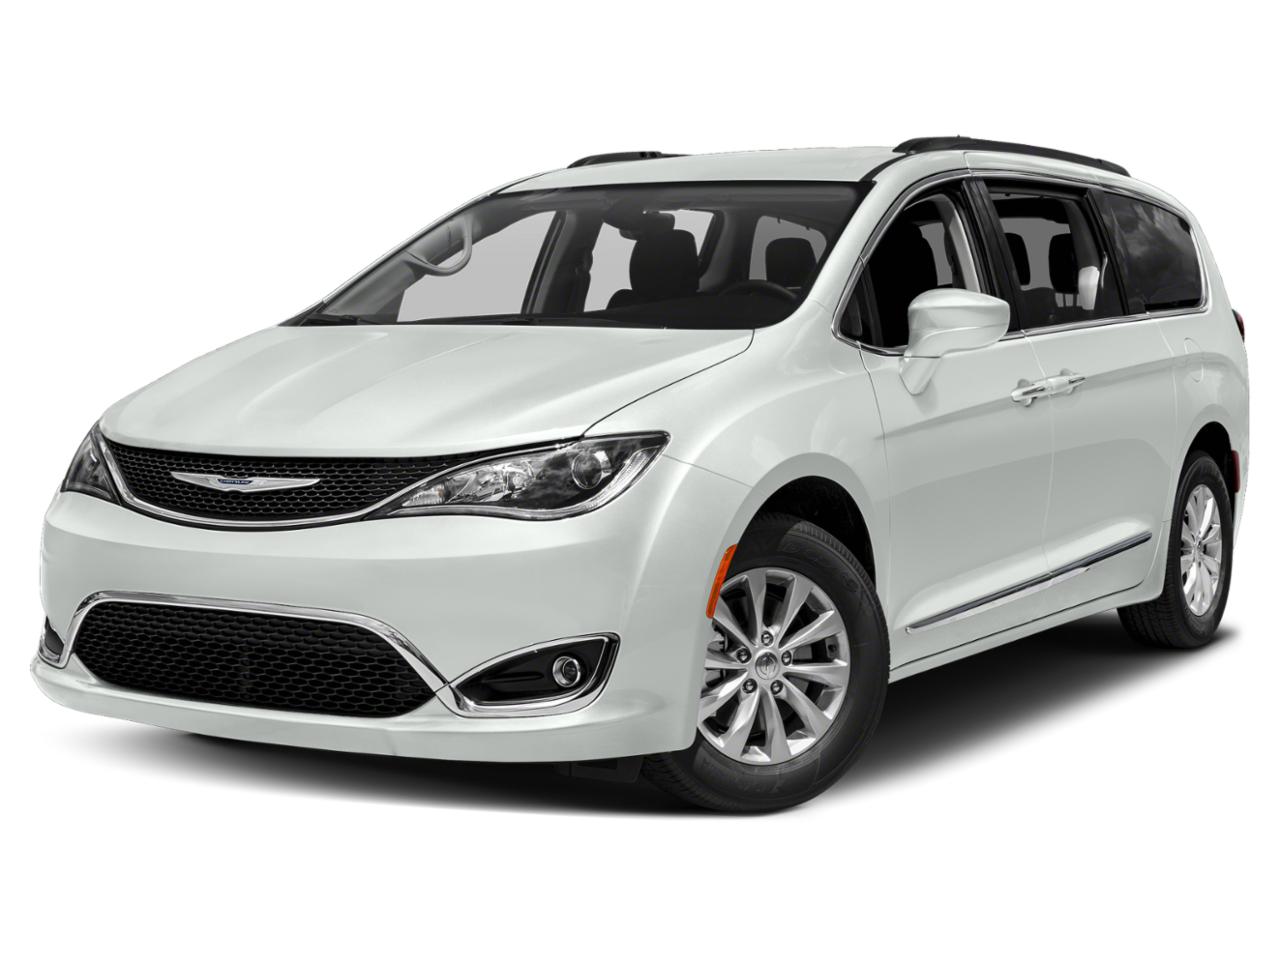 2018 Chrysler Pacifica Vehicle Photo in Trevose, PA 19053